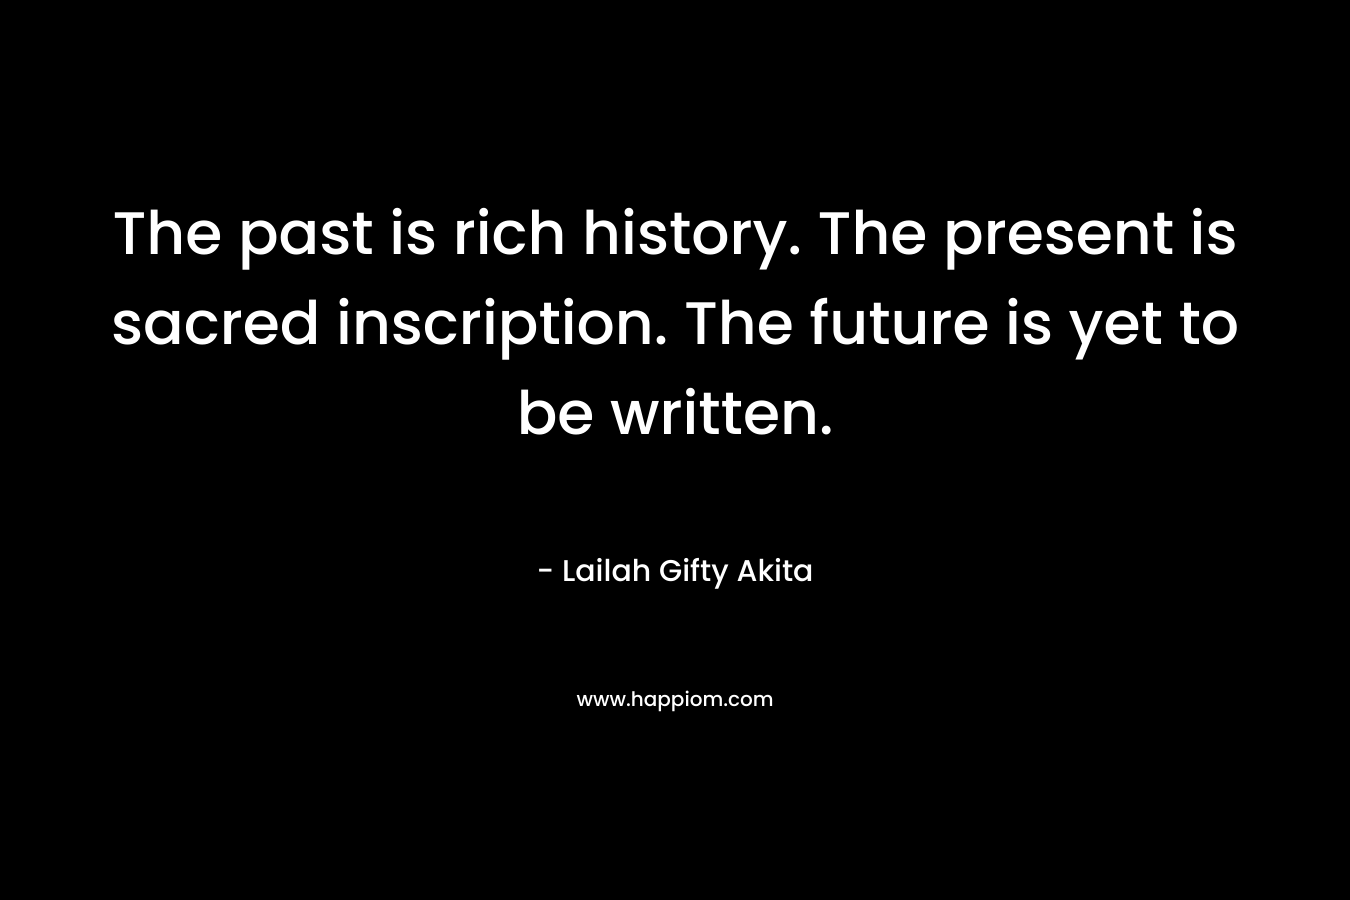 The past is rich history. The present is sacred inscription. The future is yet to be written.